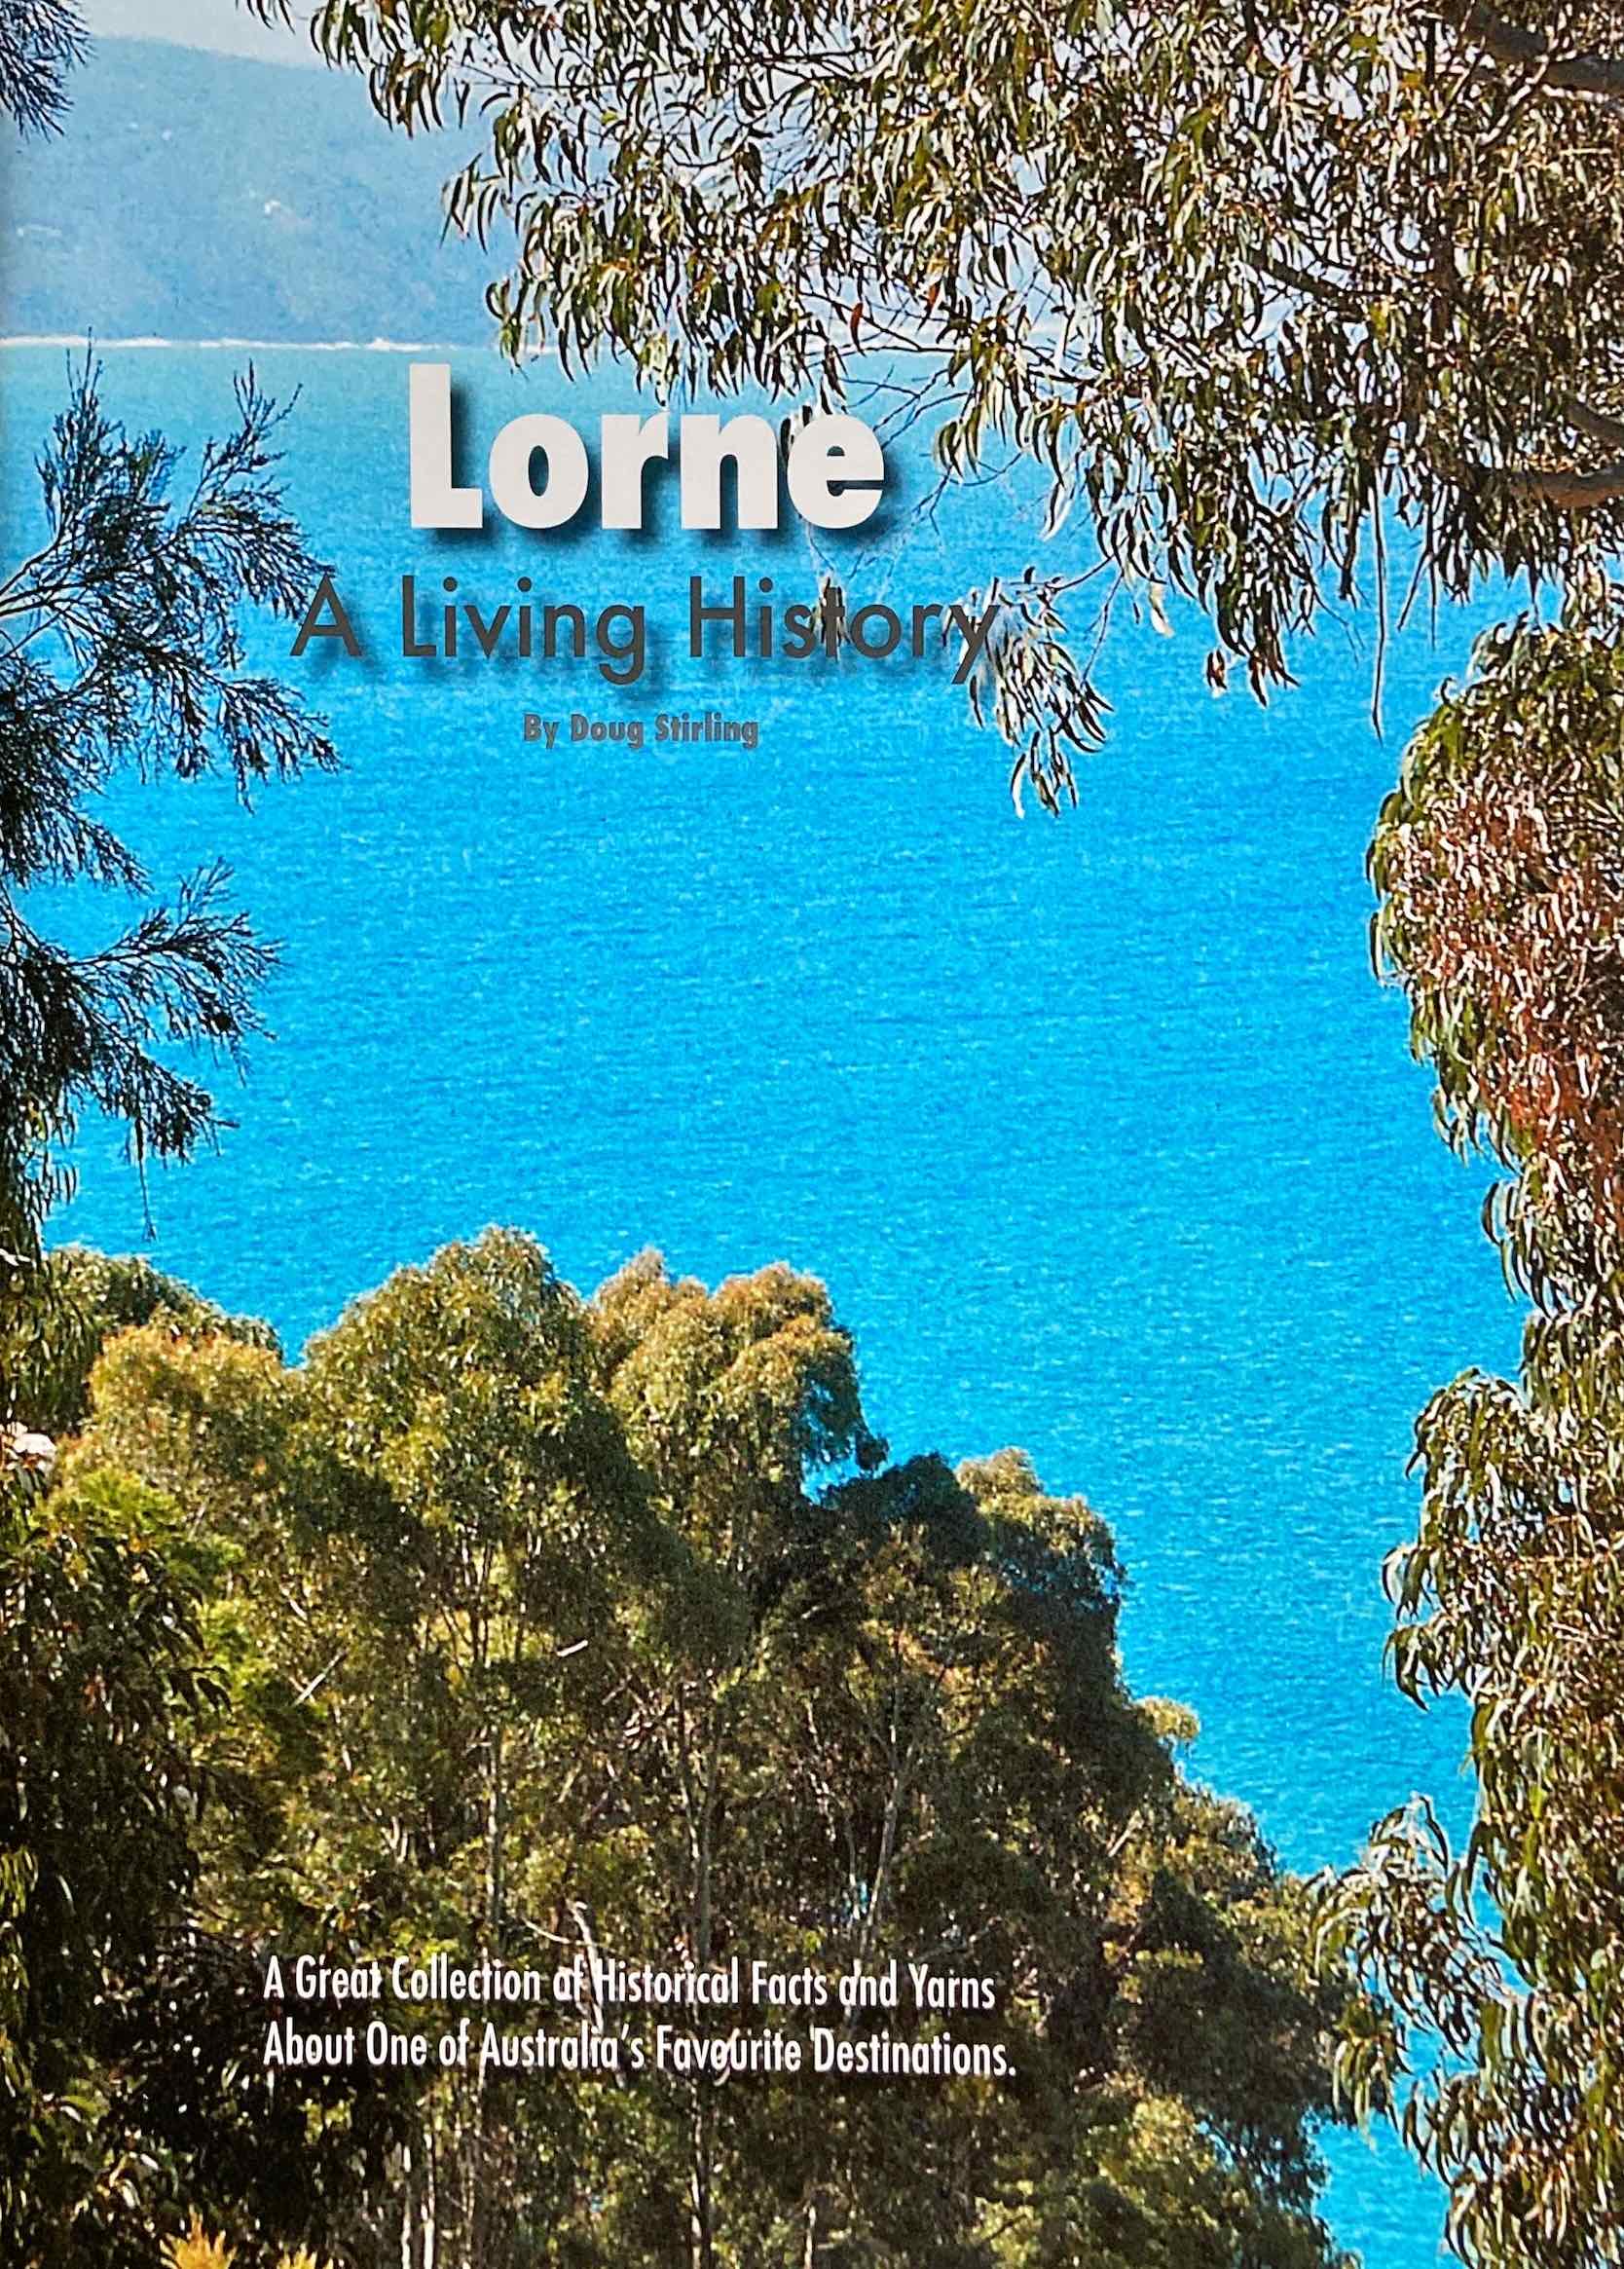 Lorne A Living History by Doug Stirling